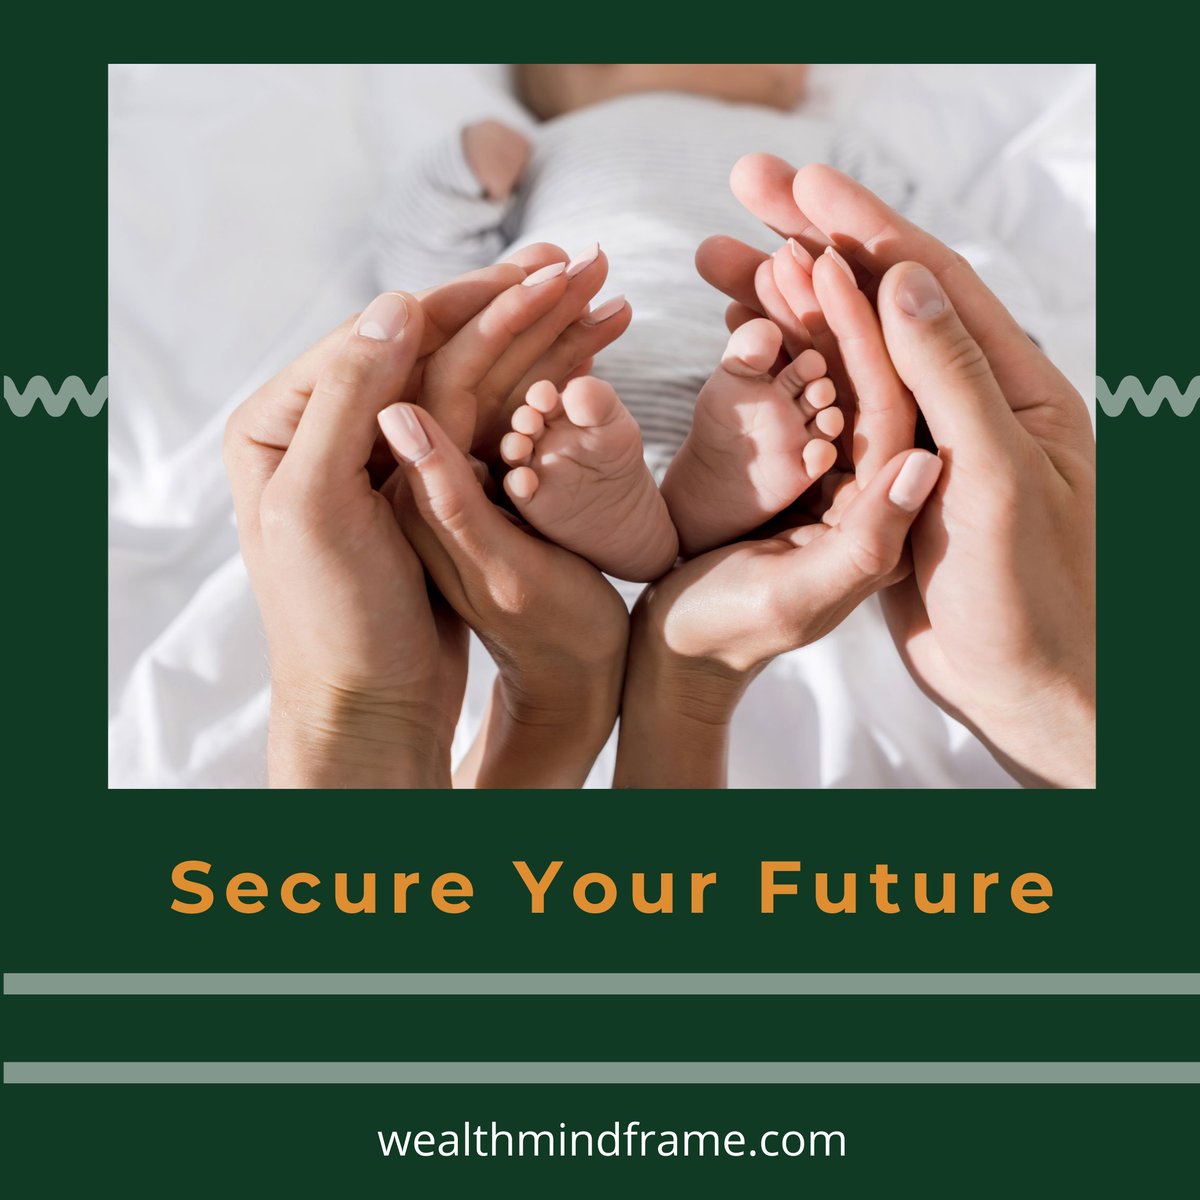 Don't just rely on your current assets to build wealth for the future. Be proactive and seek out new opportunities to secure financial stability for generations to come. Let's create a legacy of prosperity together! 💰🚀 #generationalwealth #financialstability #wealthmindframe